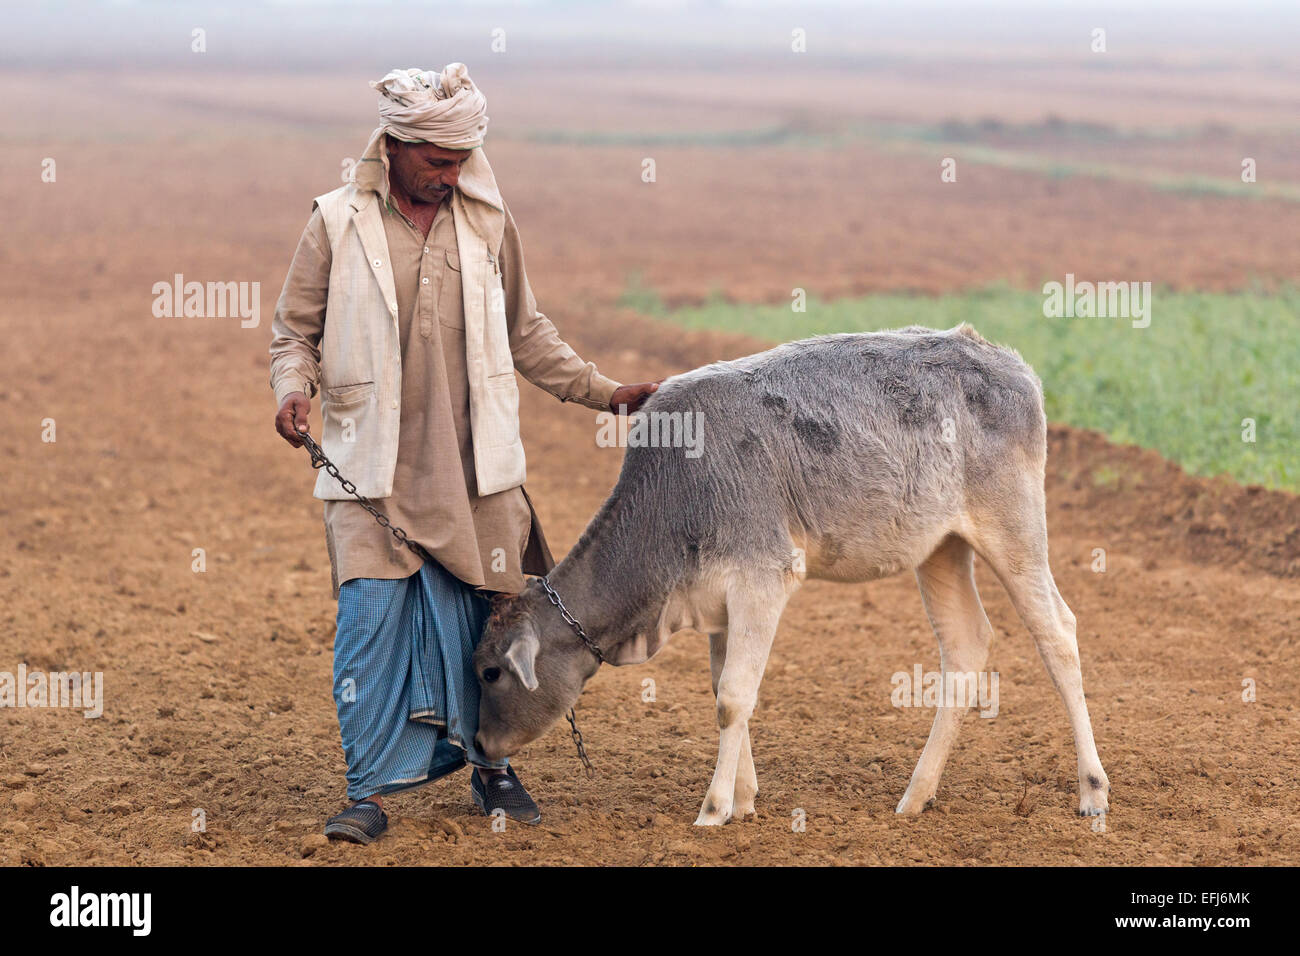 India, Uttar Pradesh, Agra, village man holding young cow in field Stock Photo